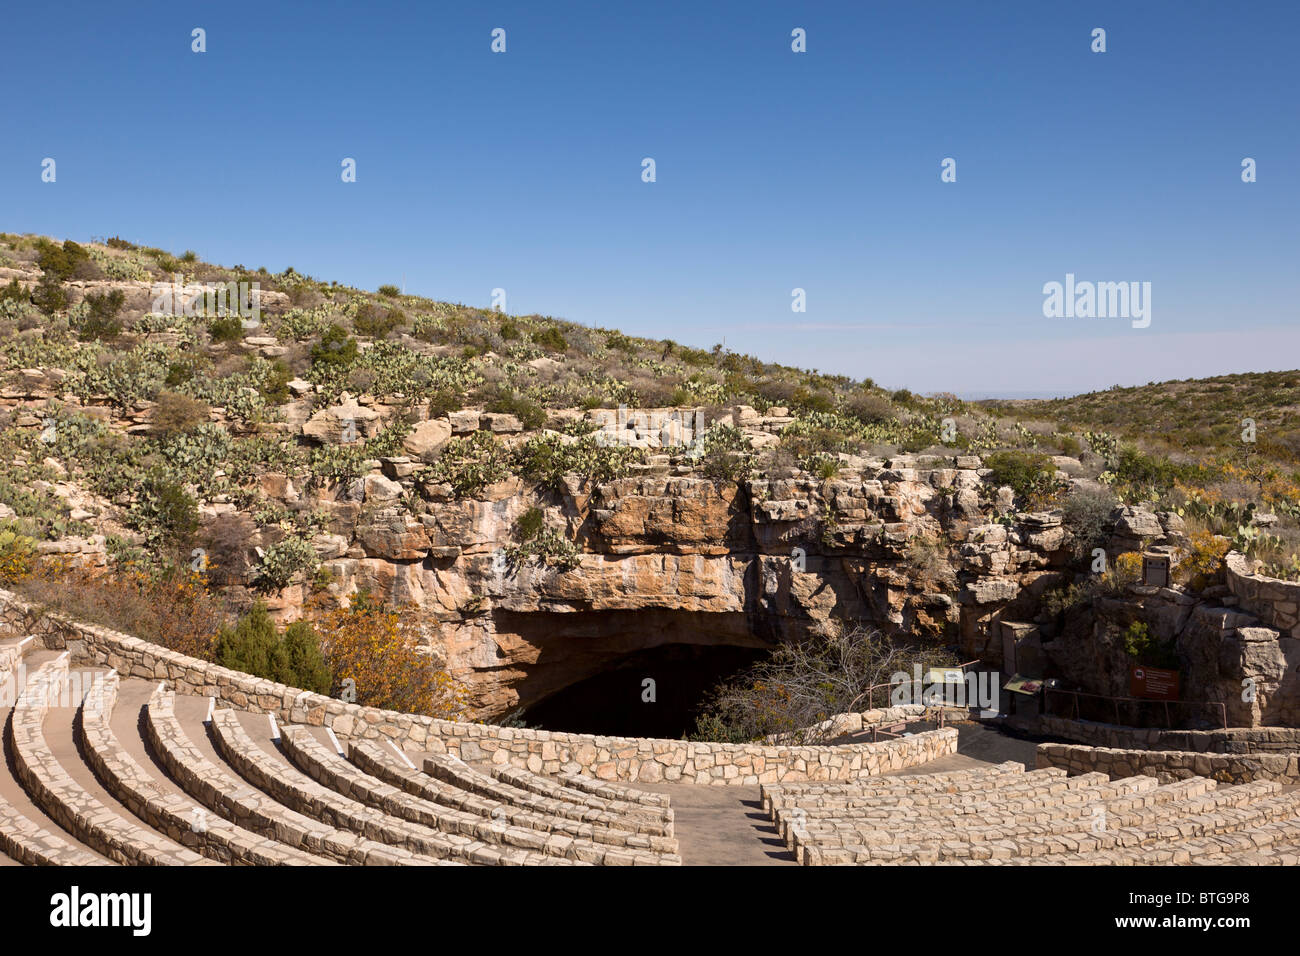 Amphitheater at Carlsbad Caverns National Park, a UNESCO World Heritage Site in southern New Mexico, USA. Stock Photo